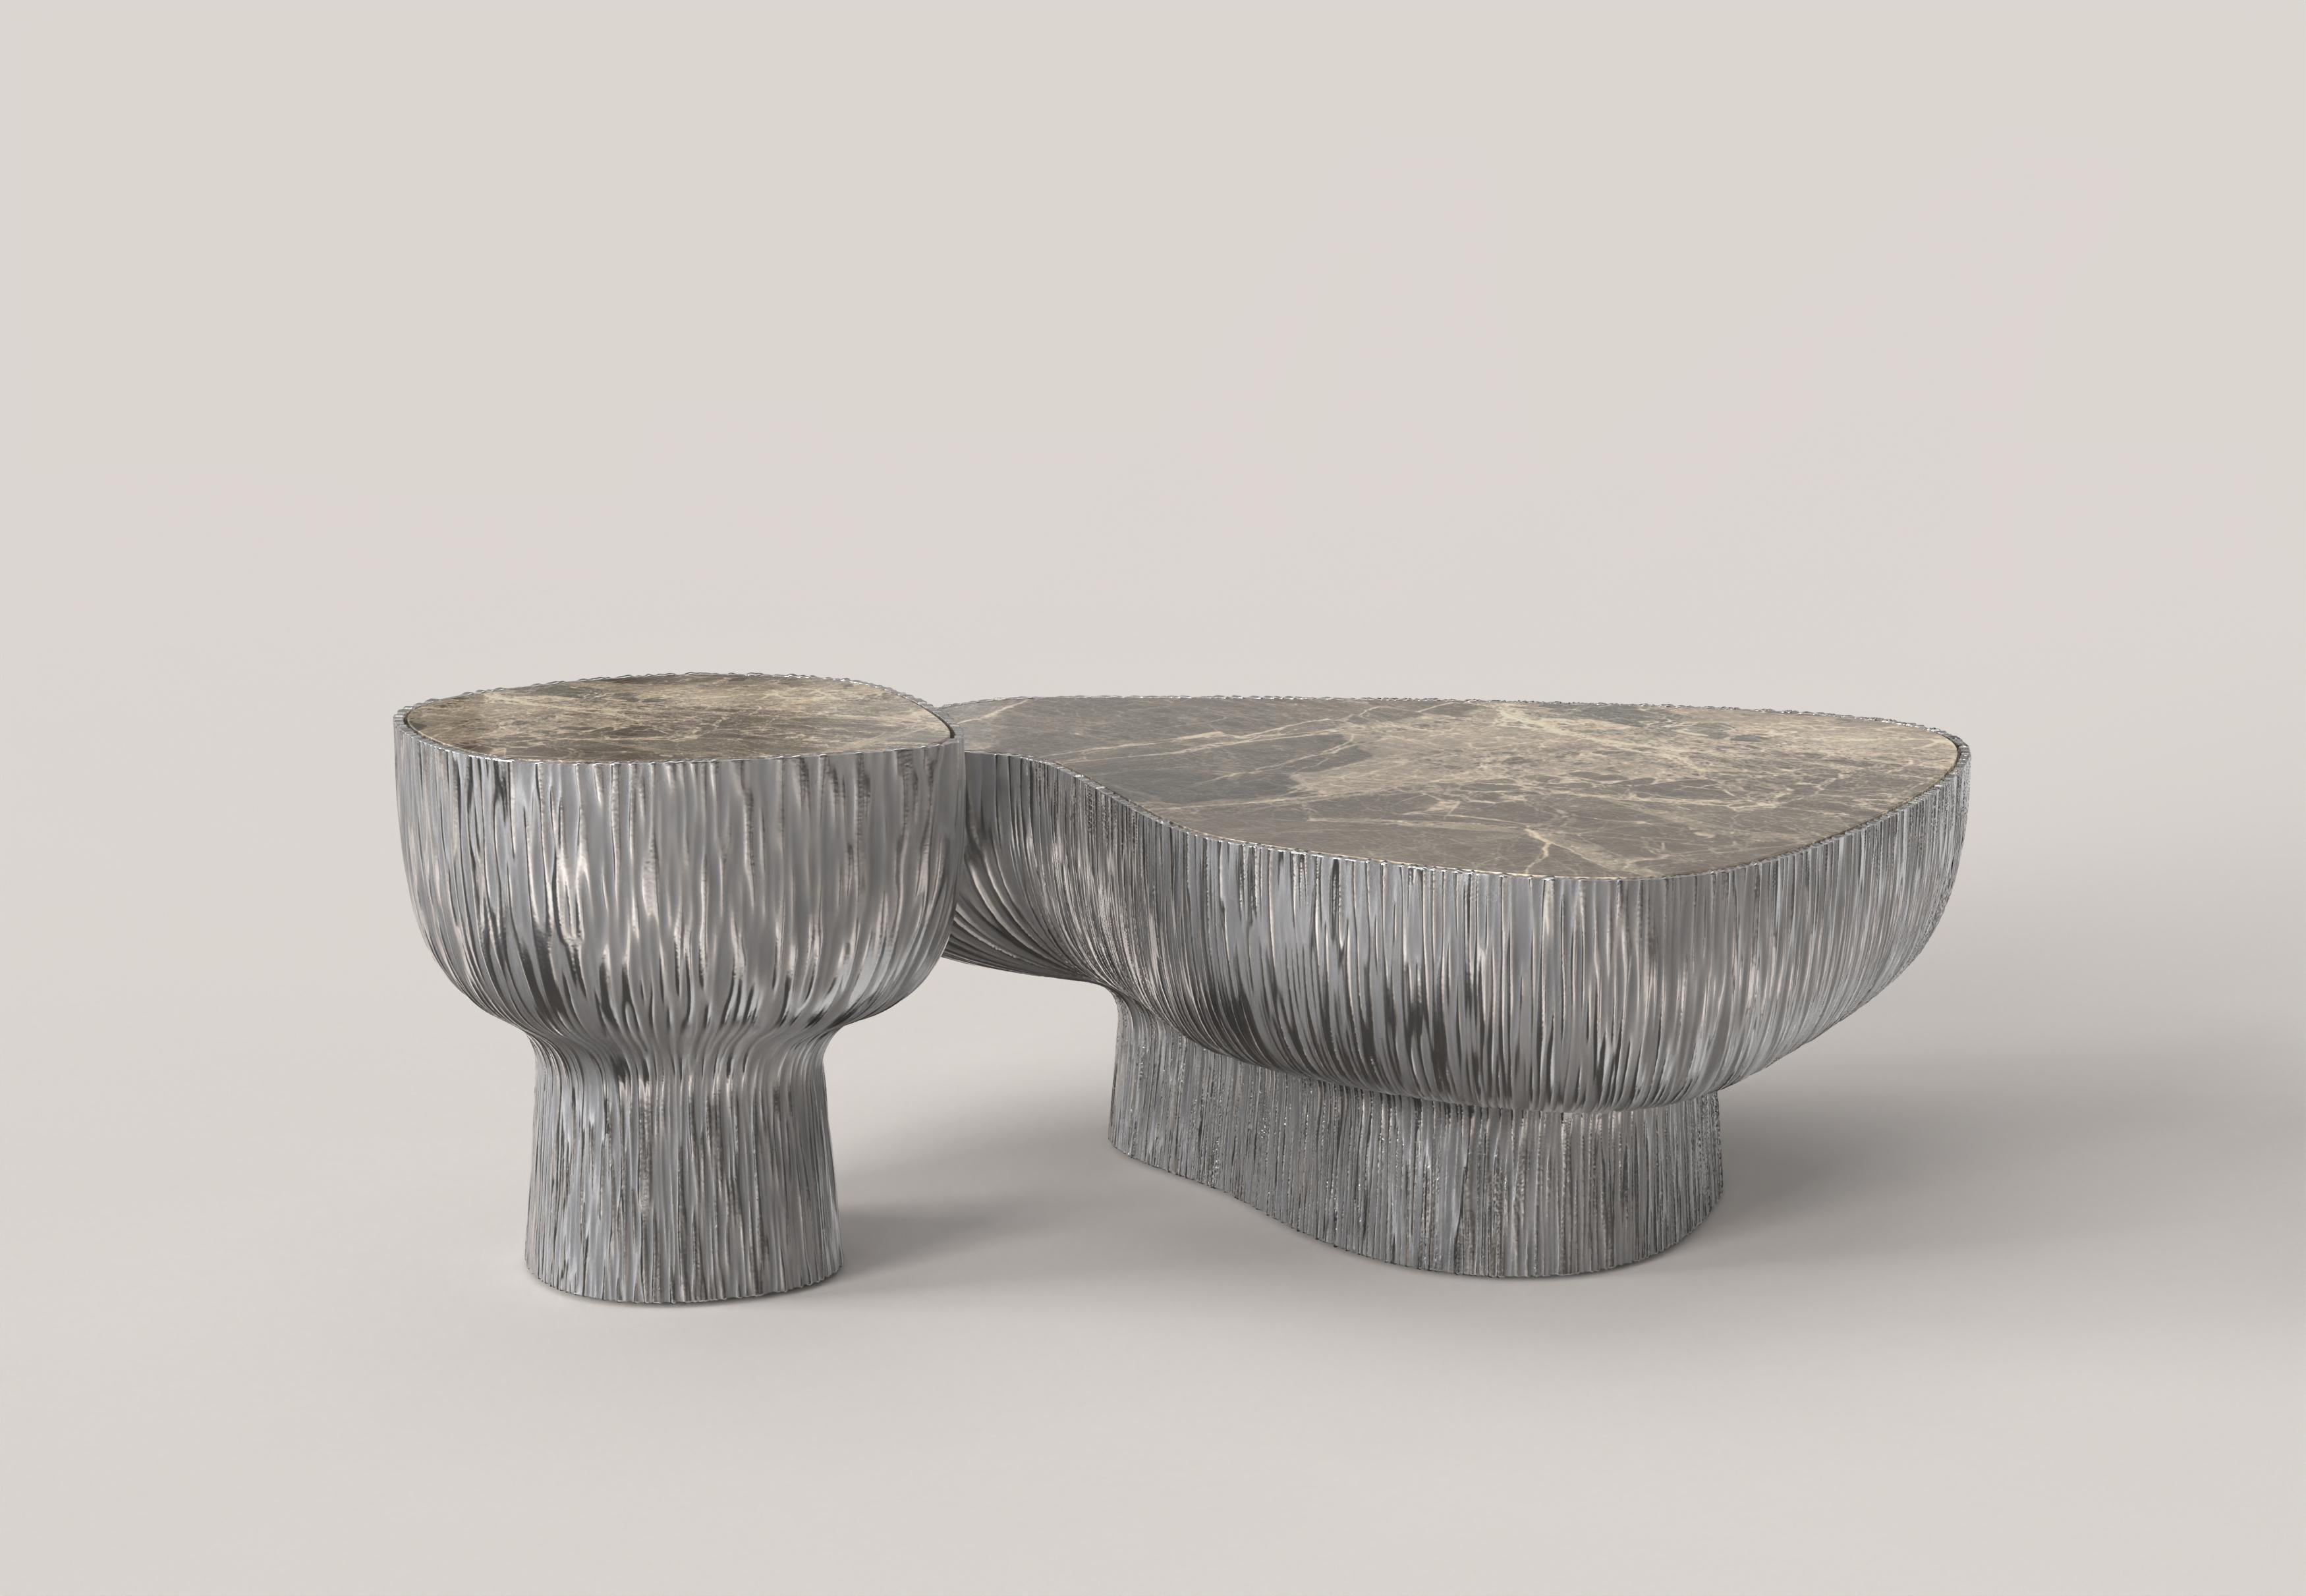 Limited Edition Marble Aluminium Table, Giava V2 by Simone Fanciullacci In New Condition For Sale In Milano, IT